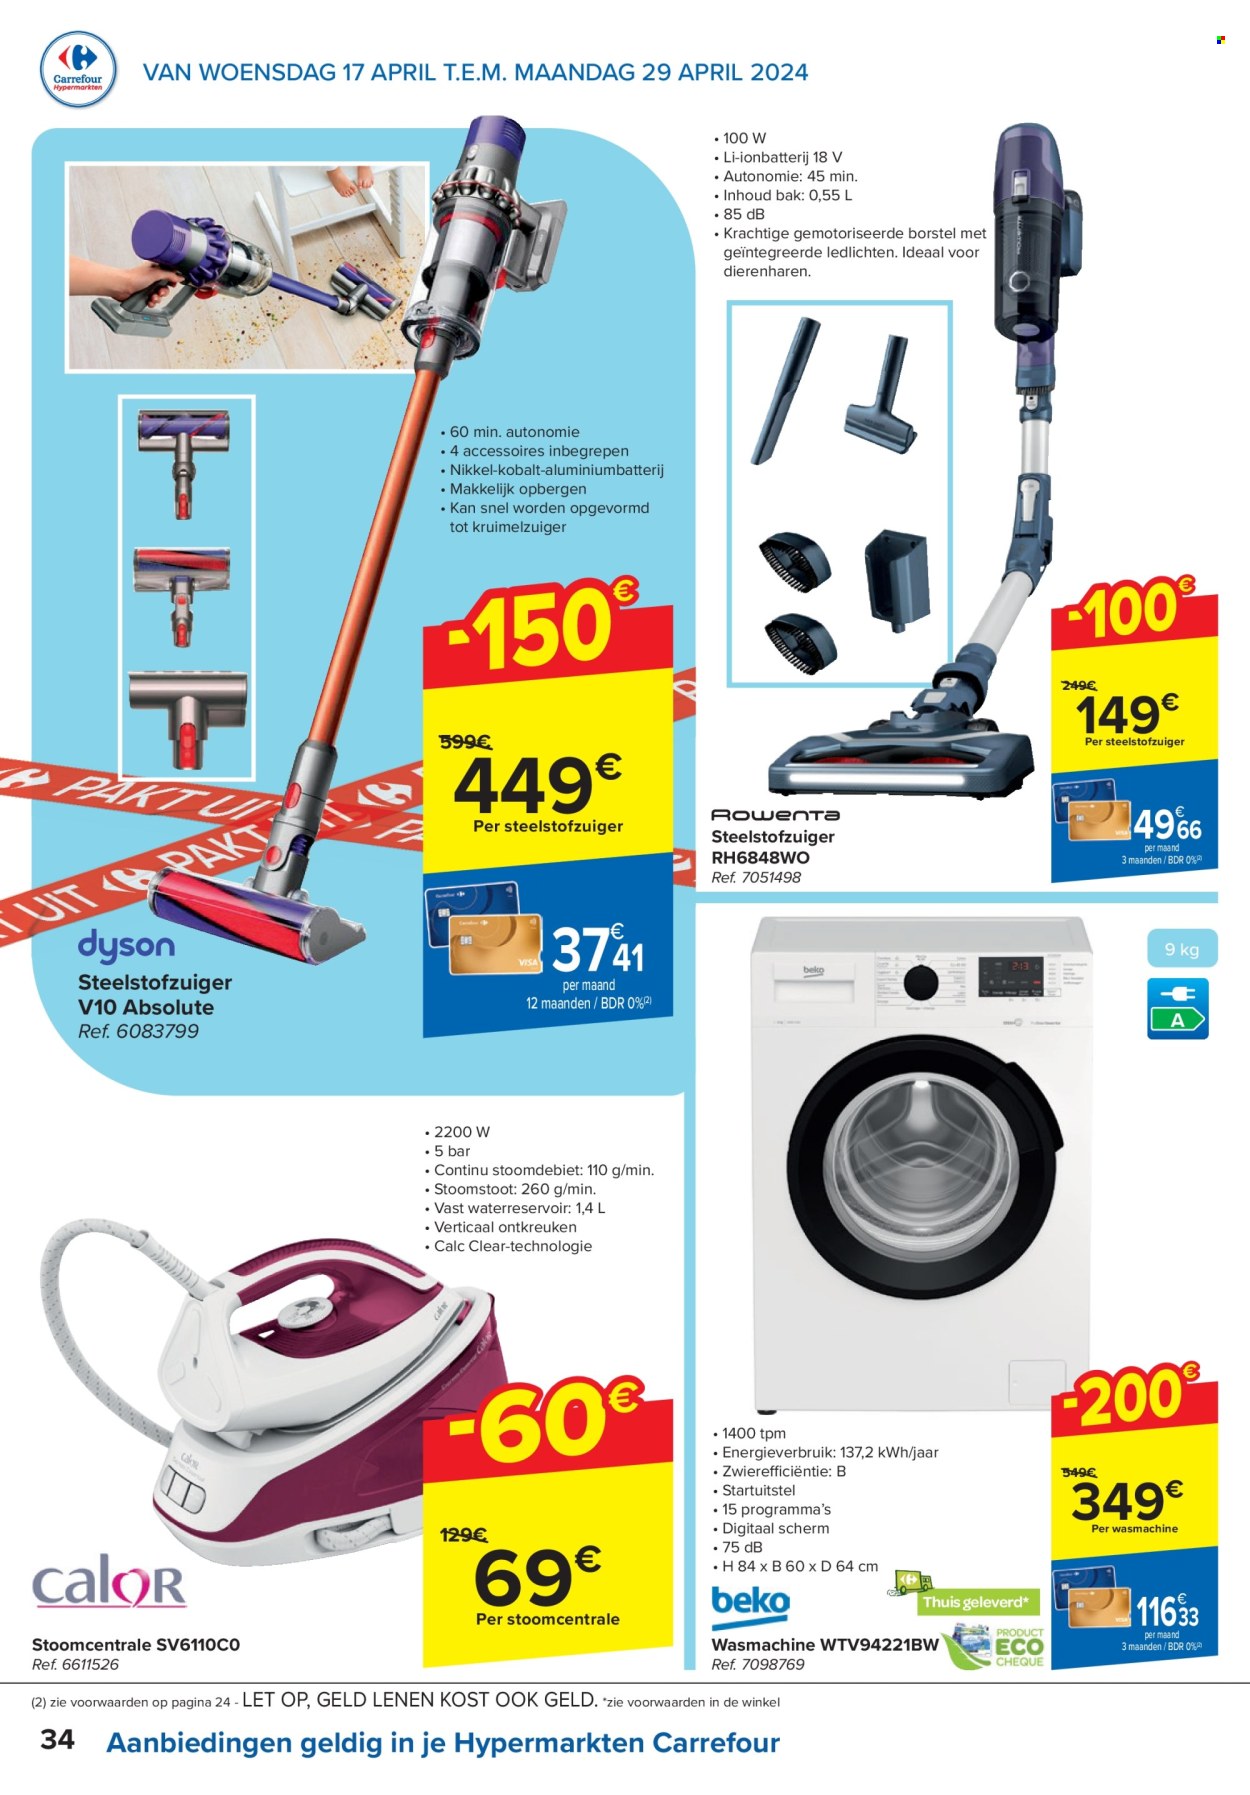 Catalogue Carrefour hypermarkt - 17.4.2024 - 29.4.2024. Page 34.